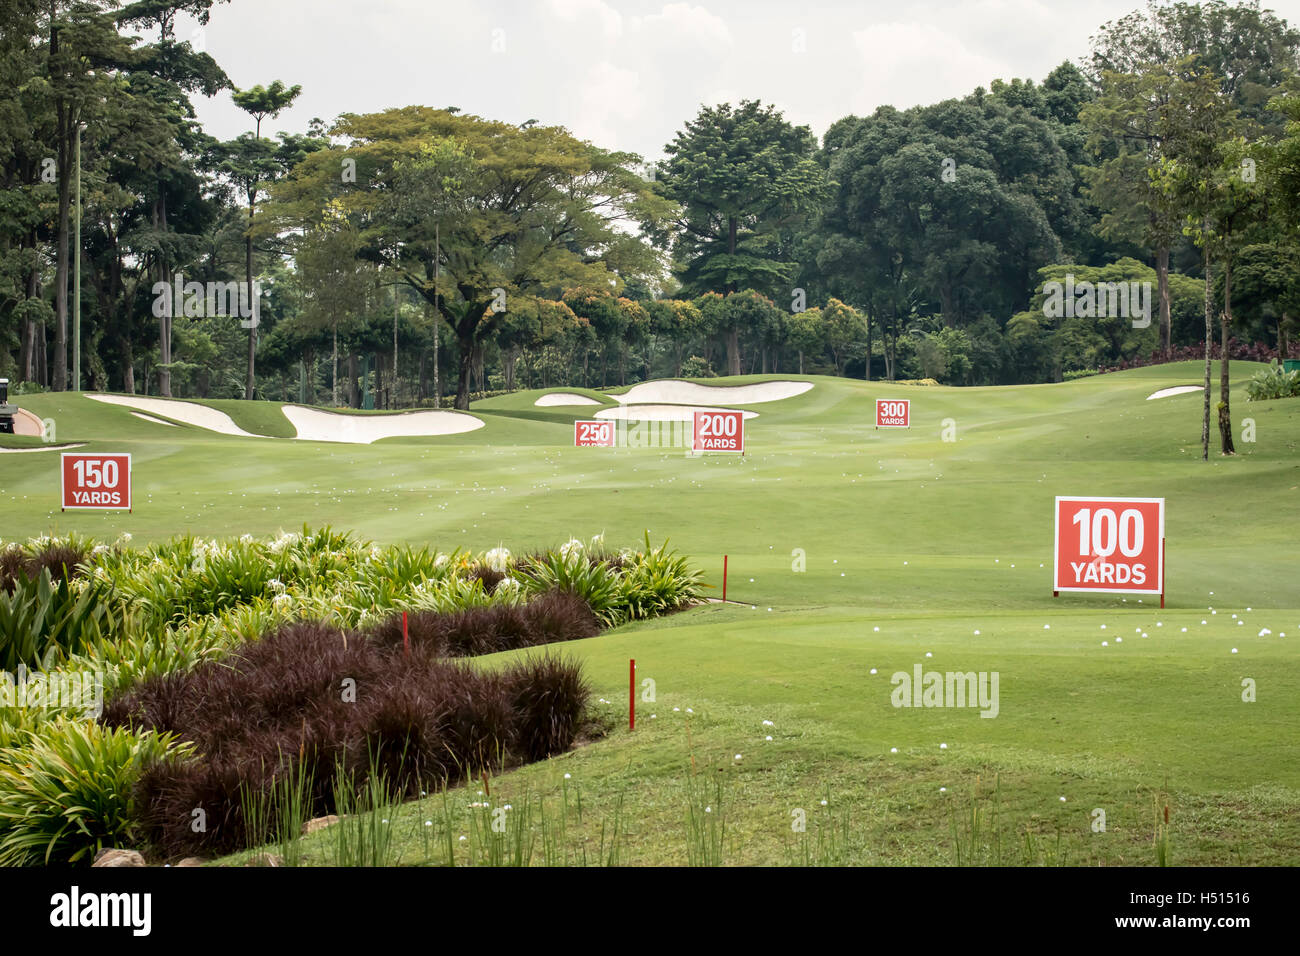 Kuala Lumpur, Malaysia.  19th Oct, 2016. A view of the driving range set up for CIMB PGA Championship starts on 20th October. Credit:  Danny Chan/Alamy Live News. Stock Photo